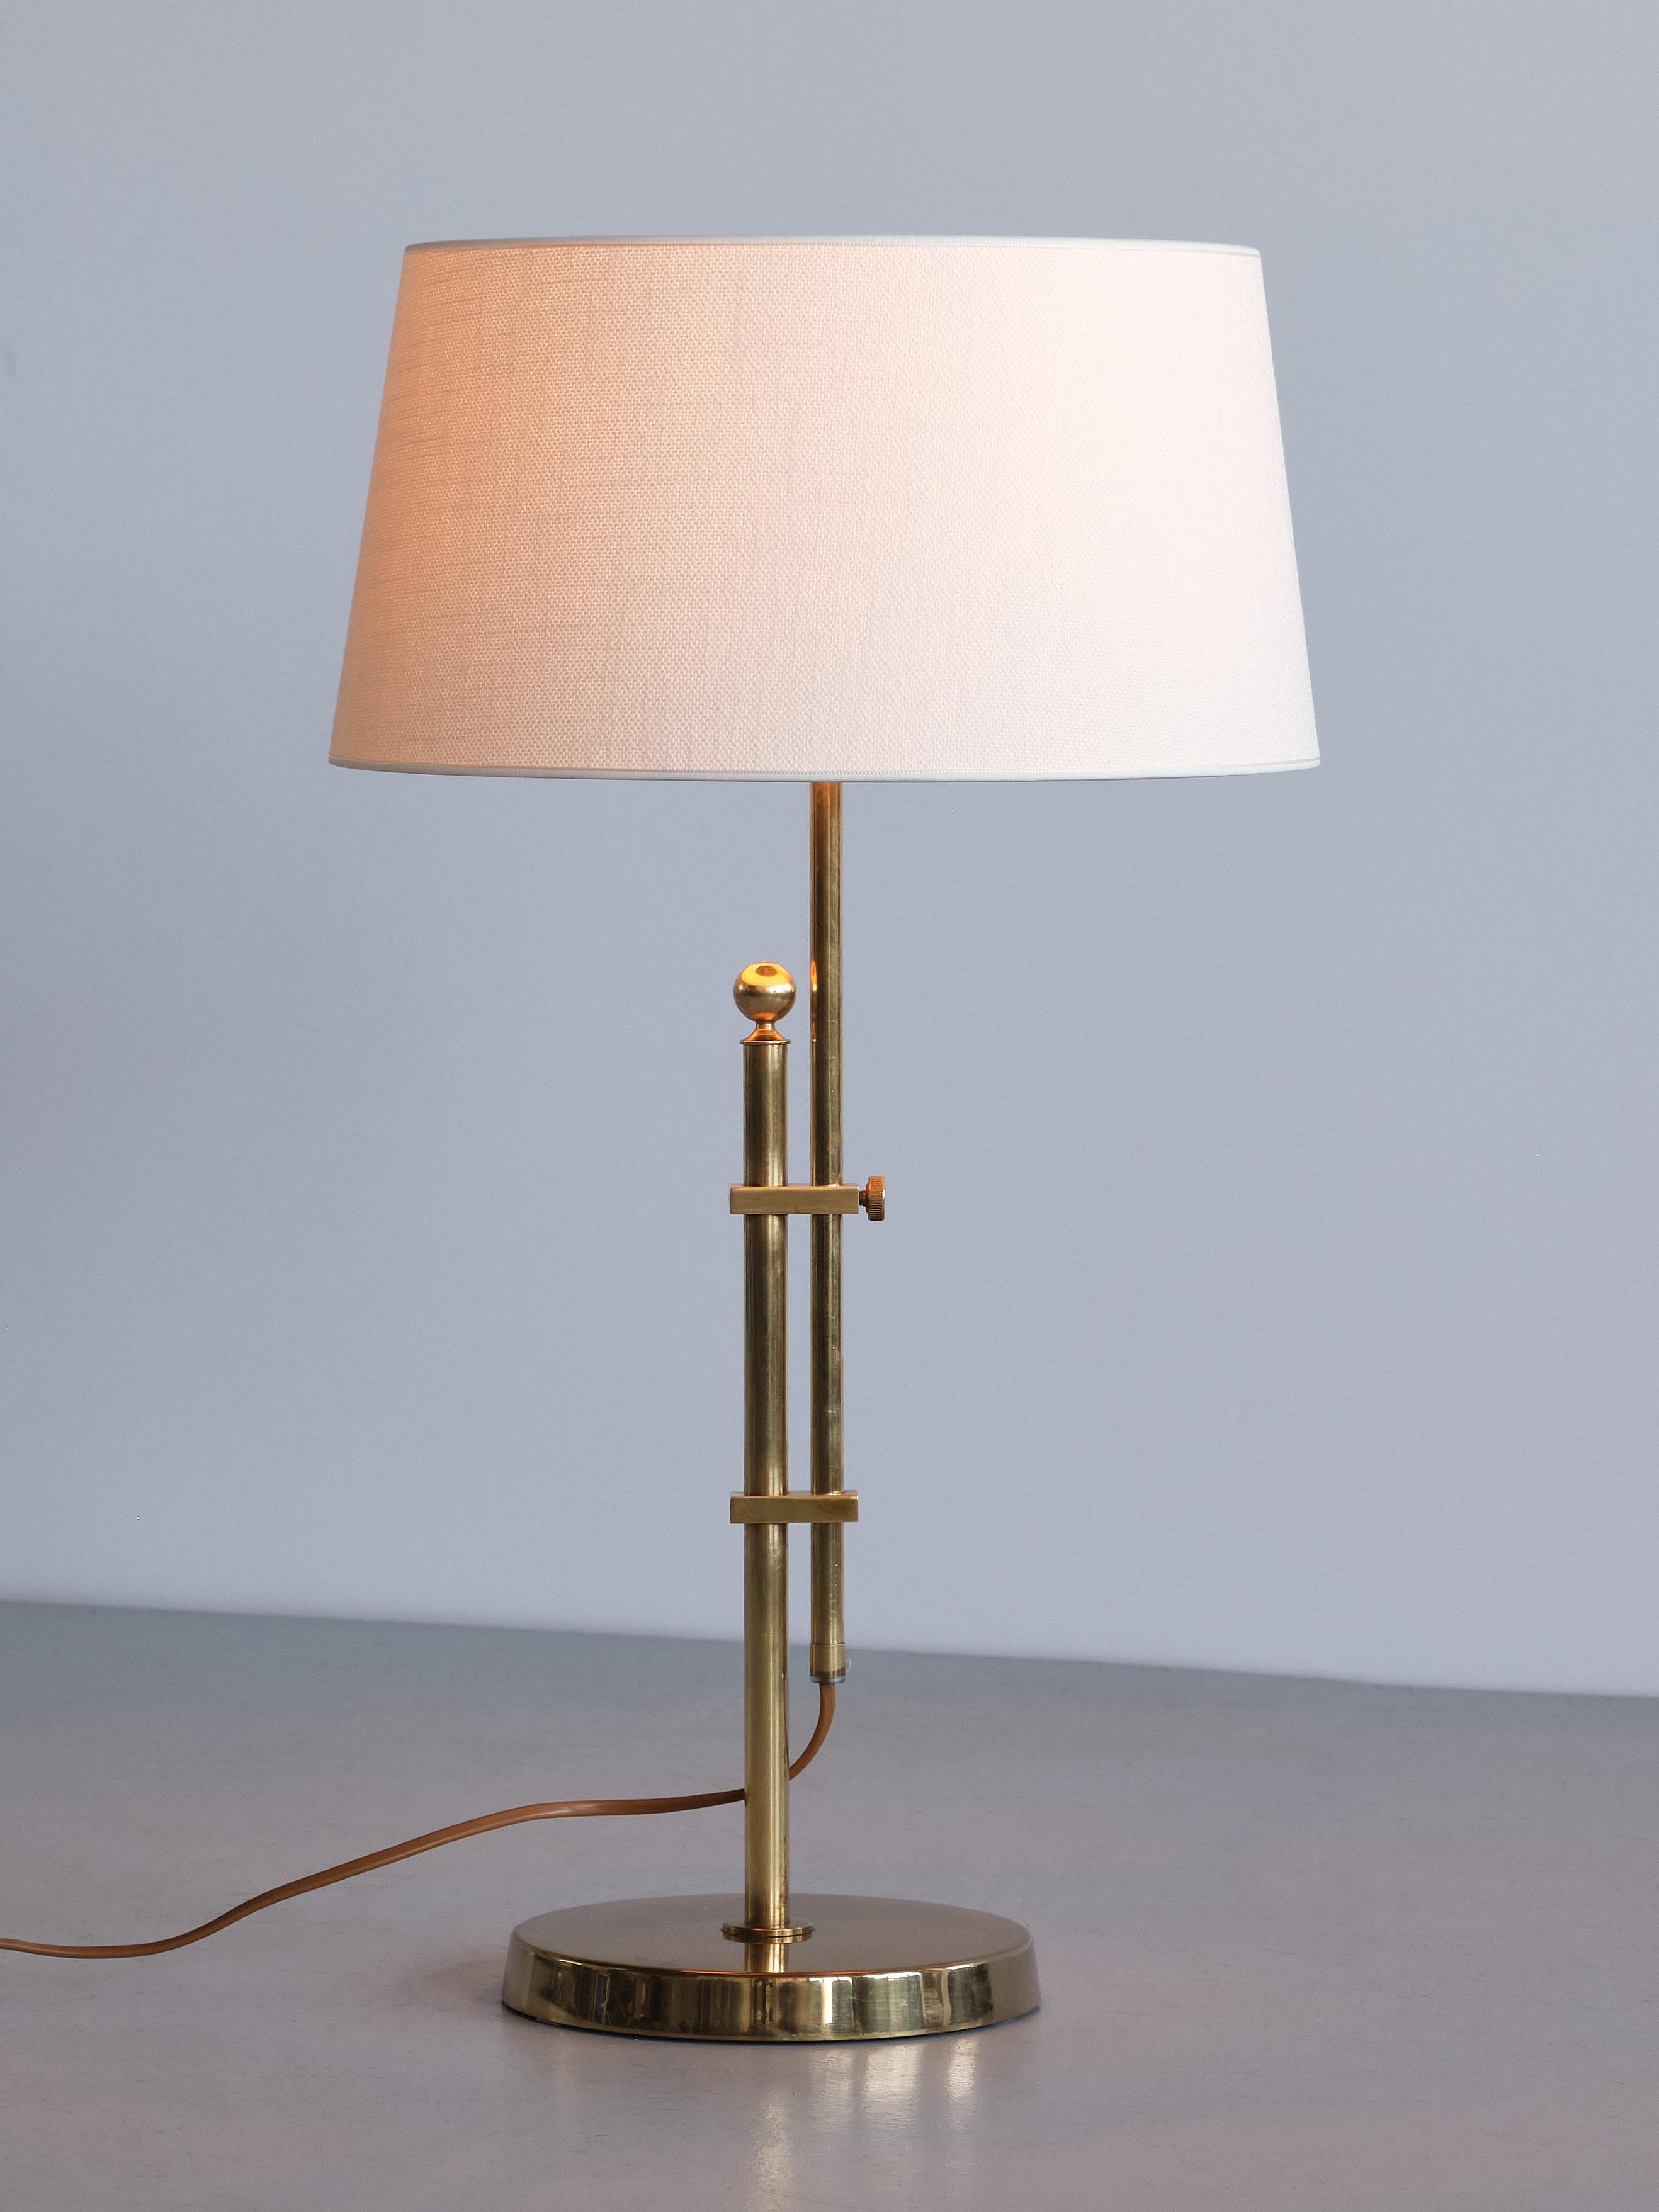 Swedish Bergboms B-131 Height Adjustable Table Lamp in Brass, Sweden, 1950s For Sale